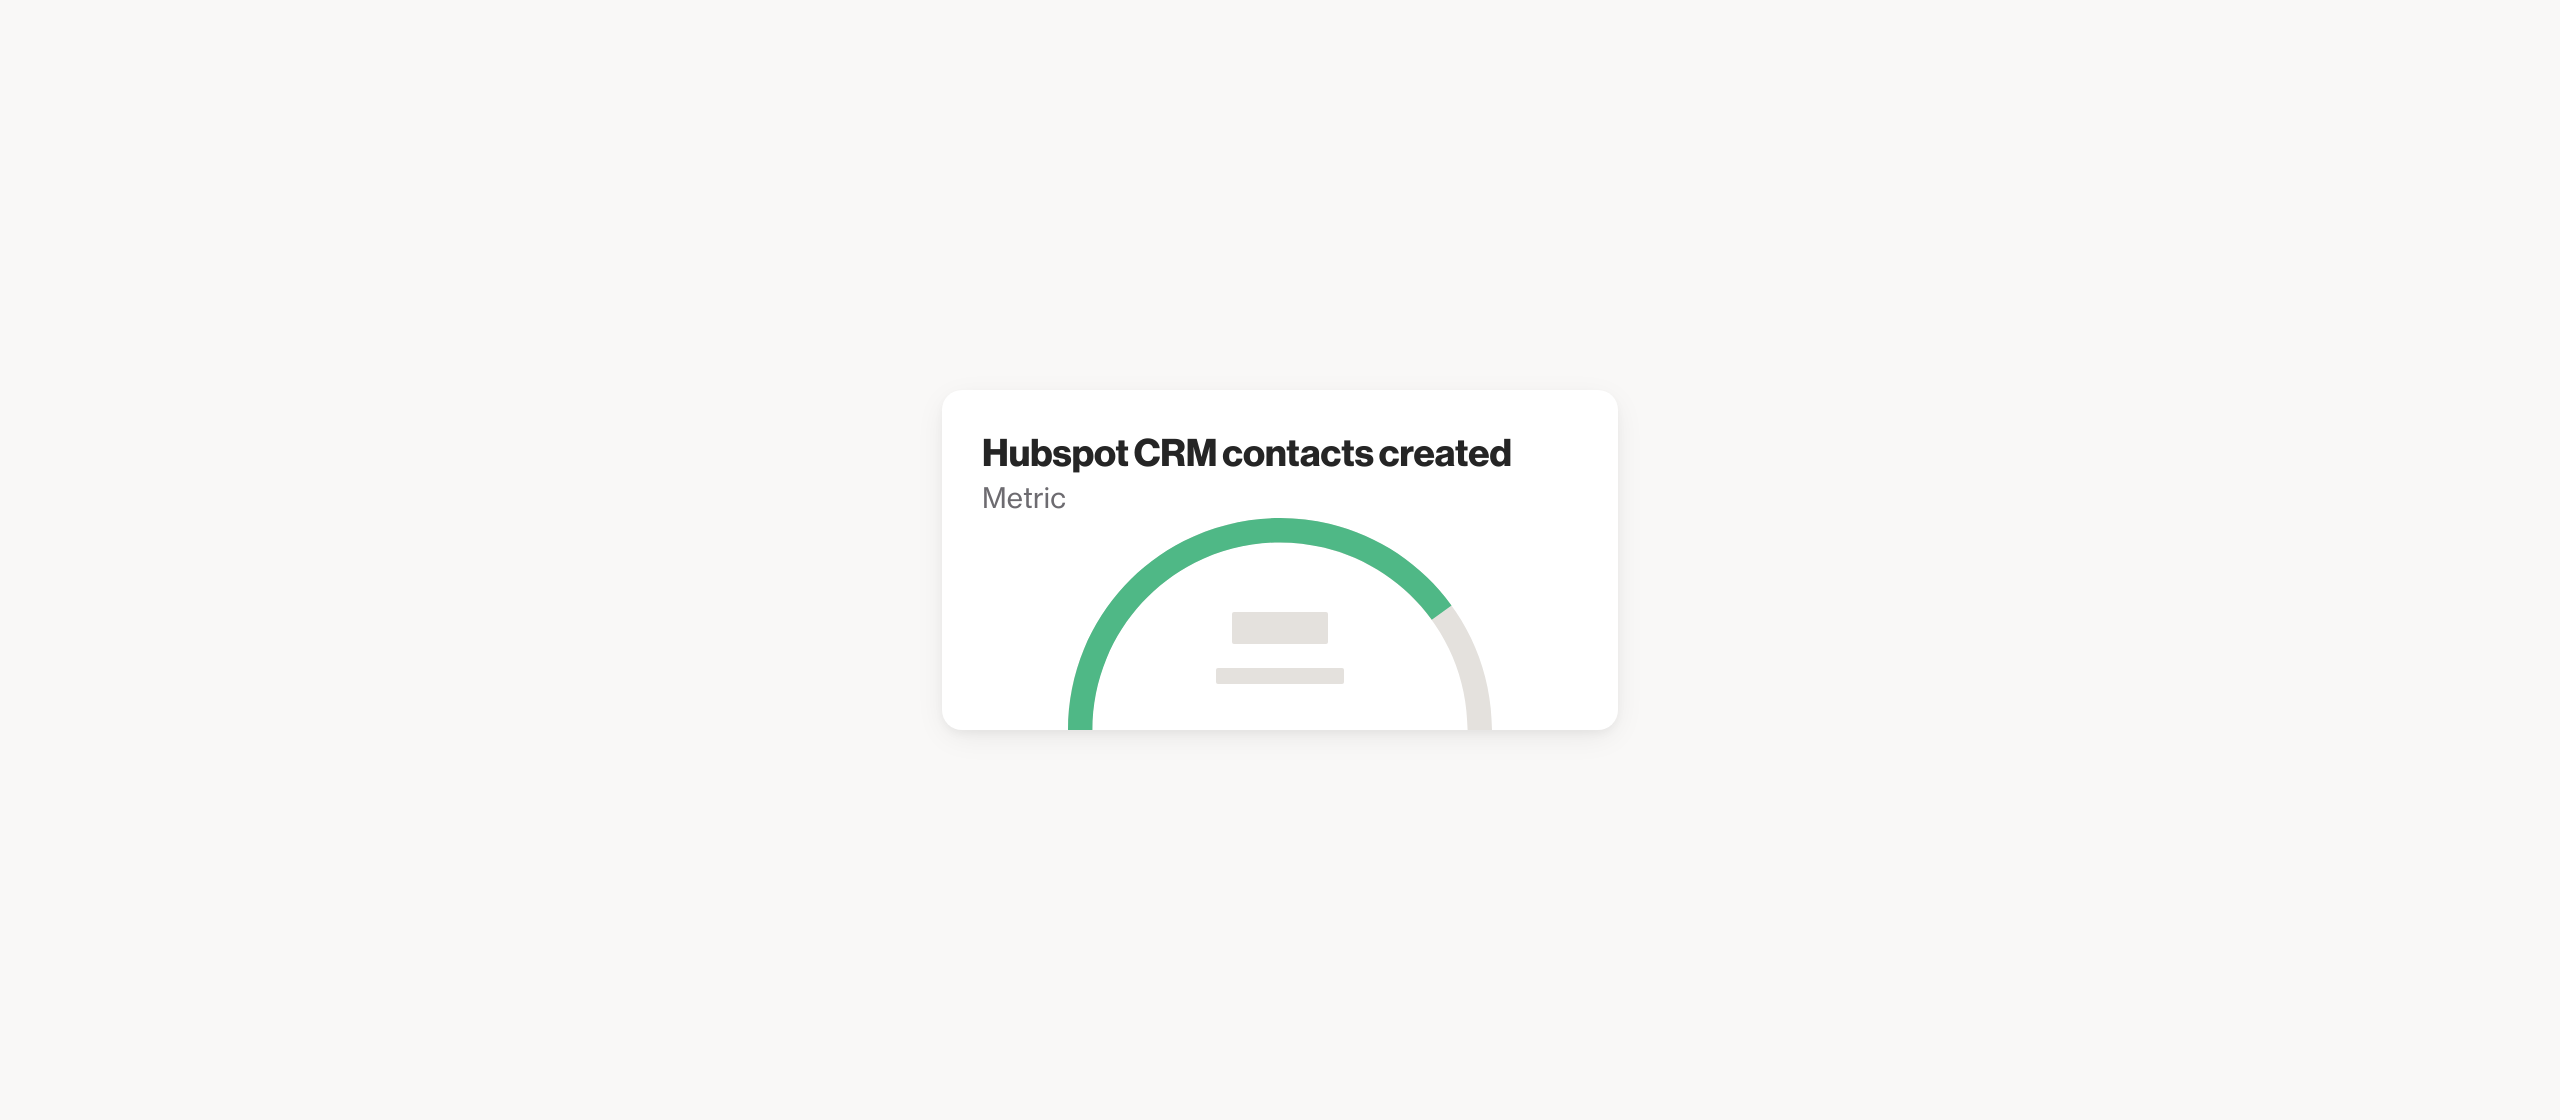 Hubspot CRM contacts created